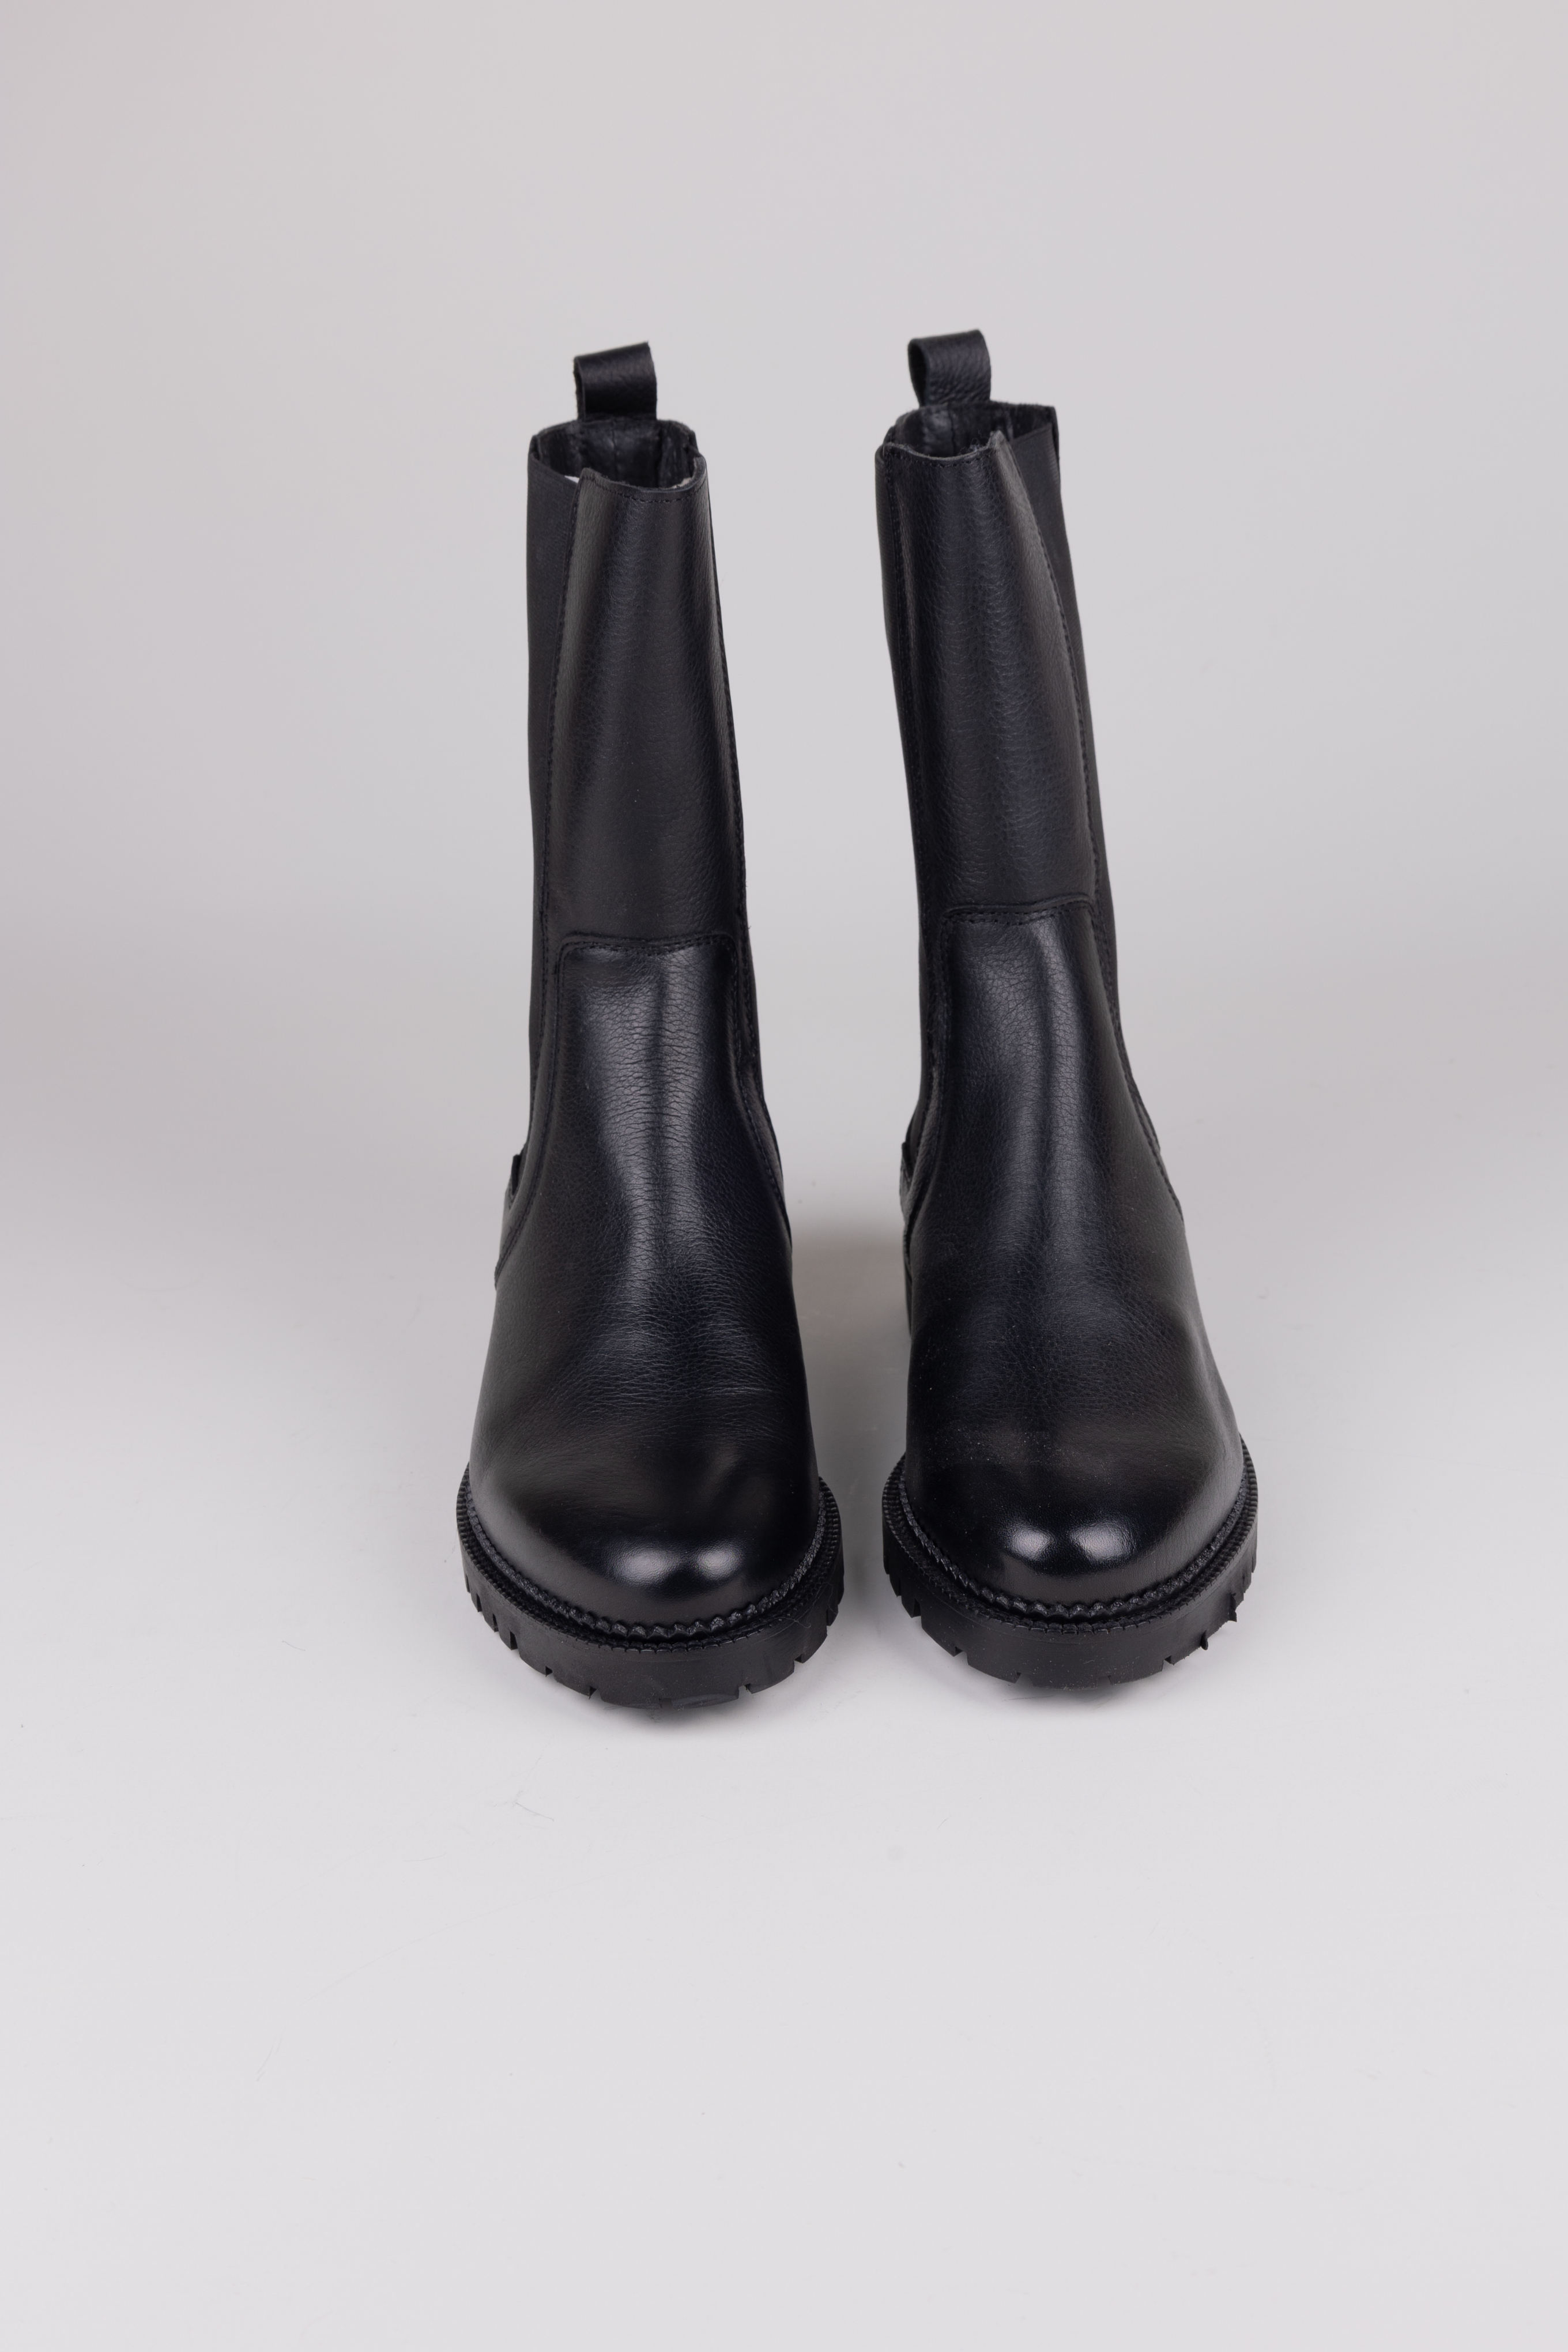 OU - BEE 215-A BOOTS WOMEN - BLACK LEATHER